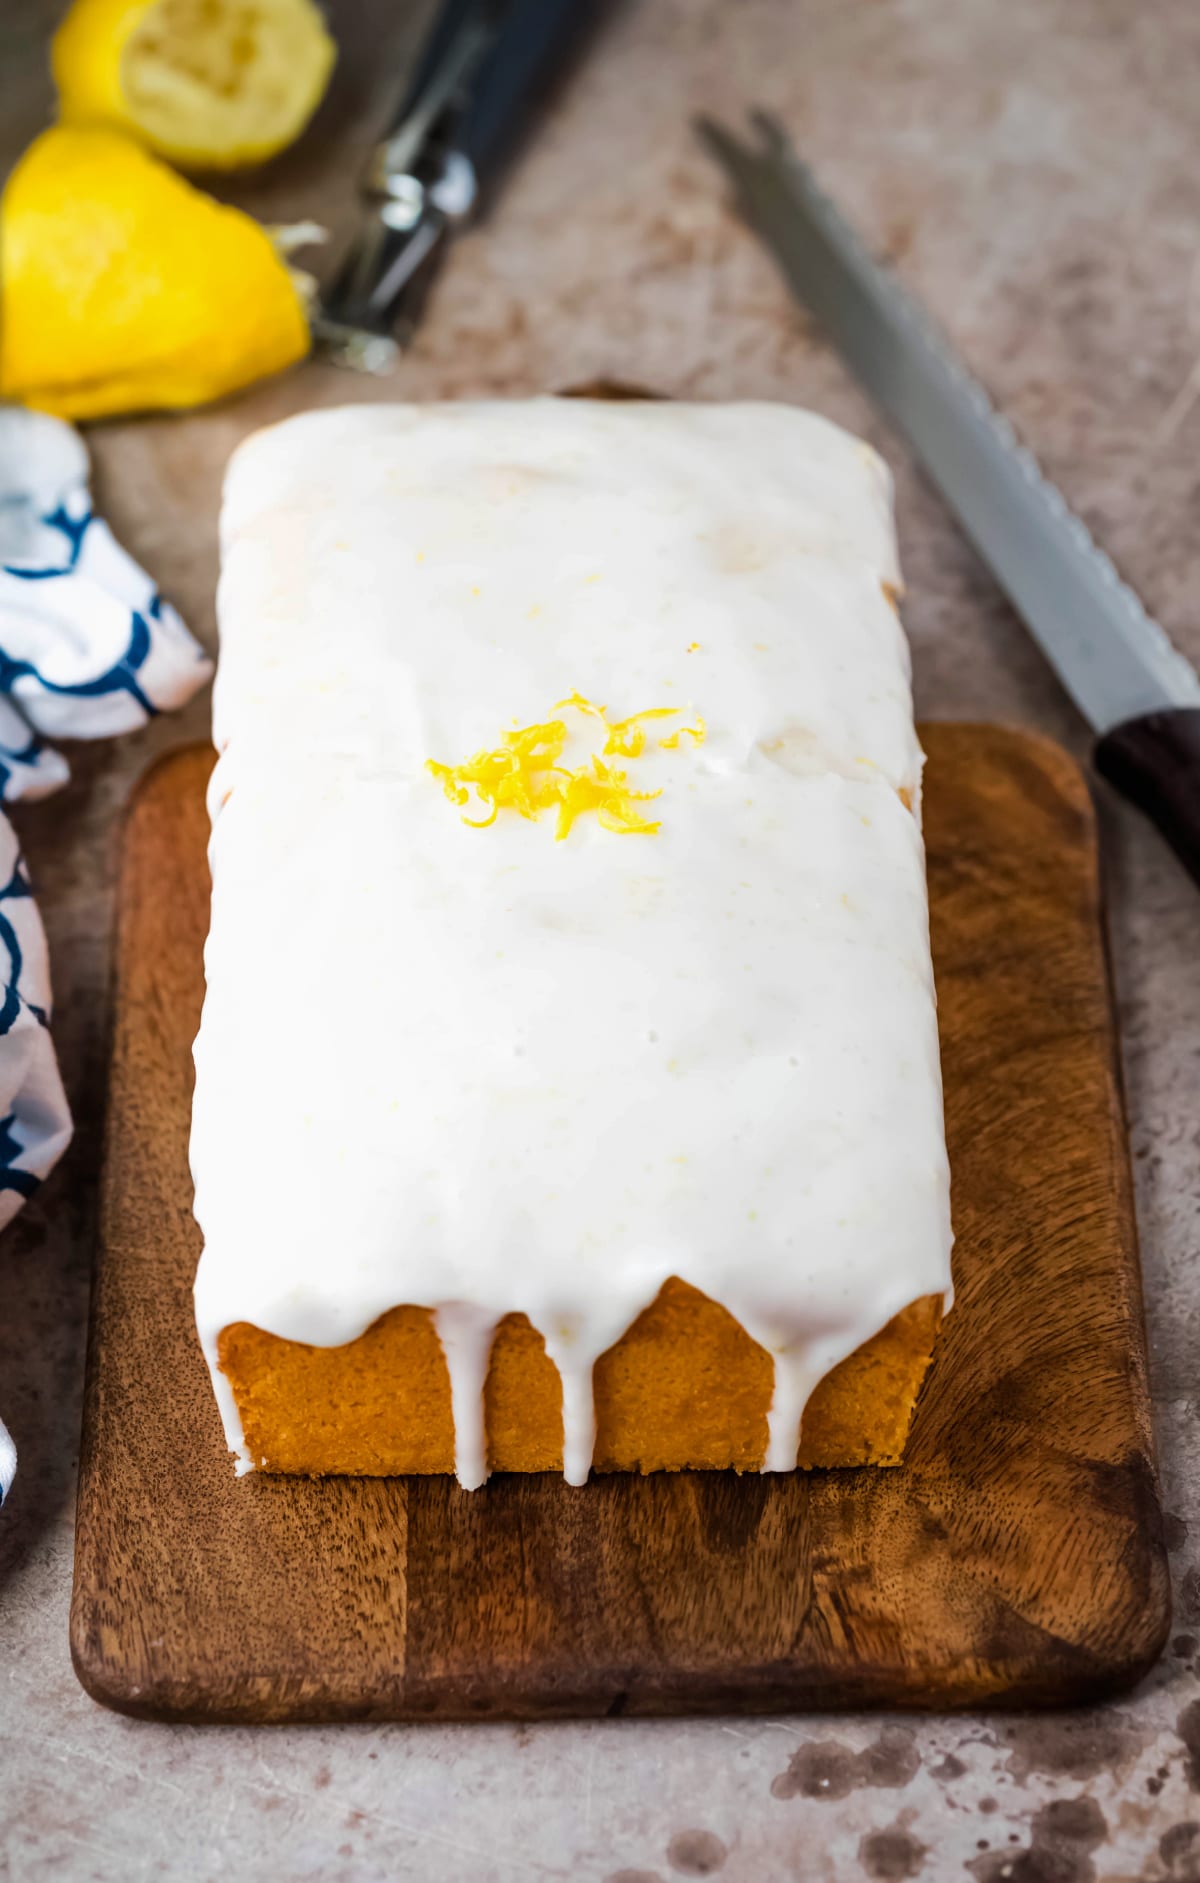 Iced lemon loaf cake on a wooden cutting board next to a bread knife